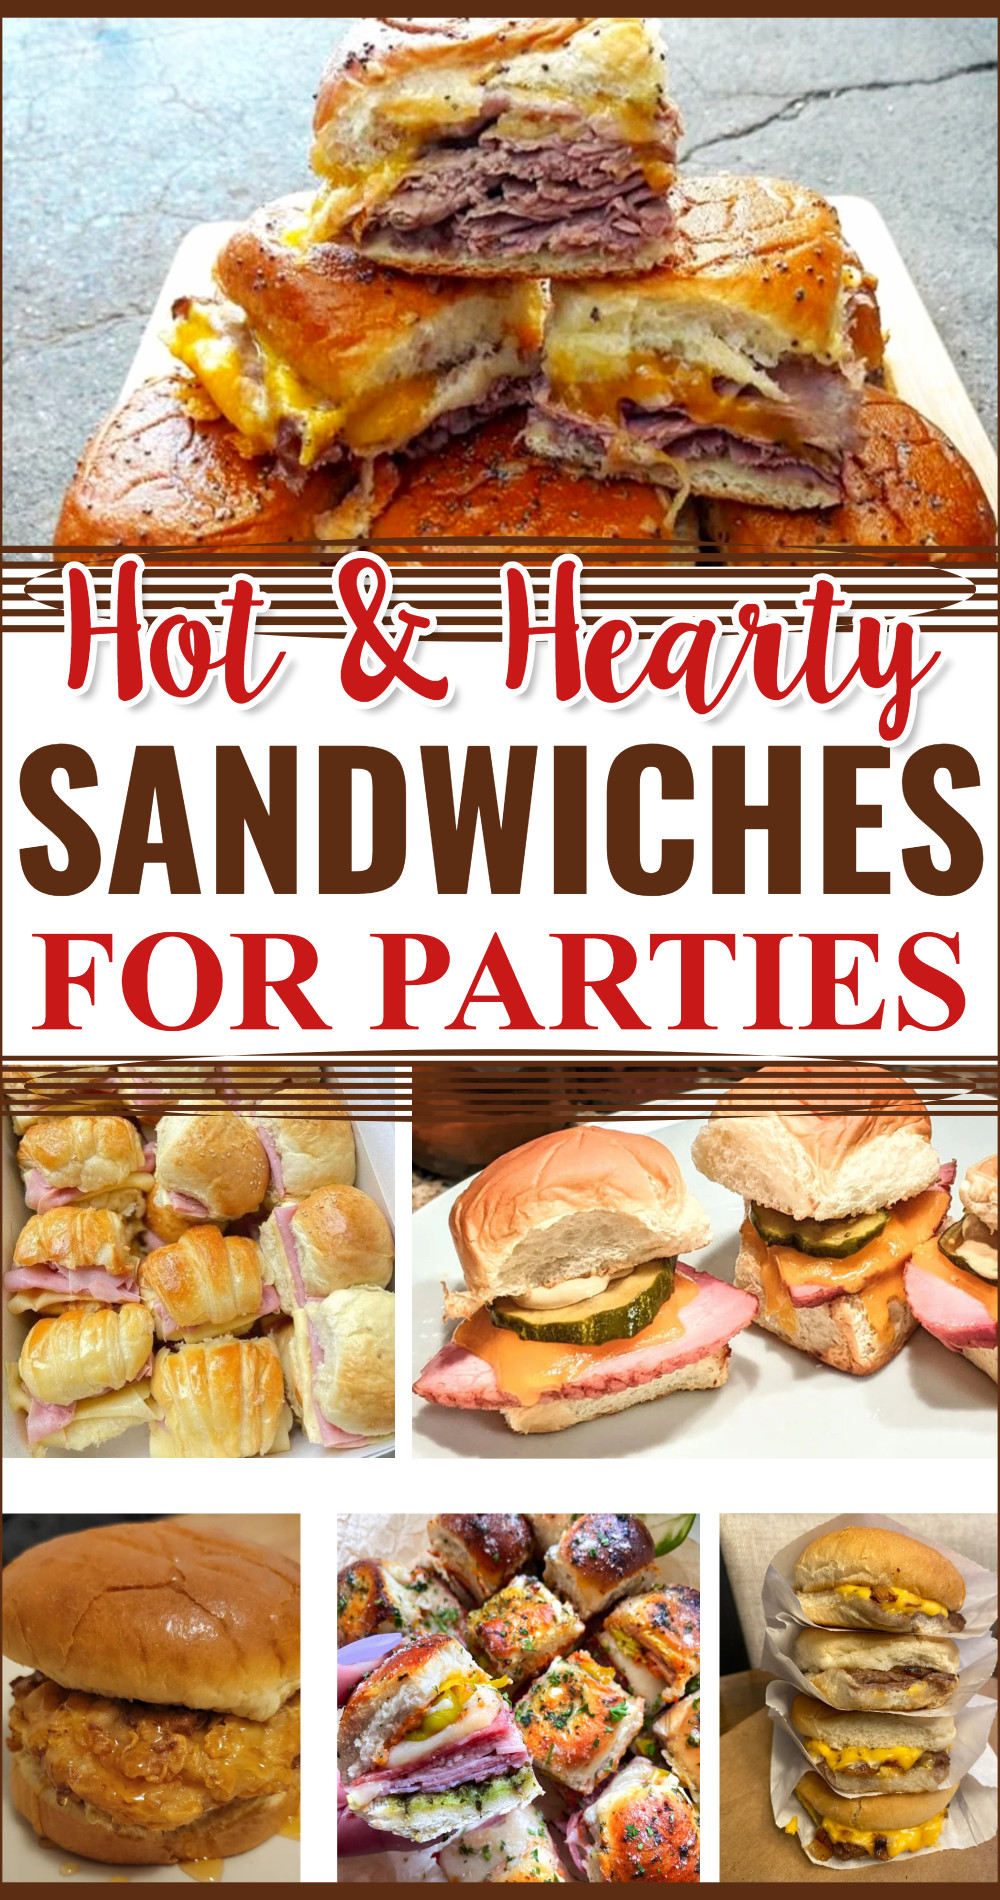 hot and hearty sandwiches for parties